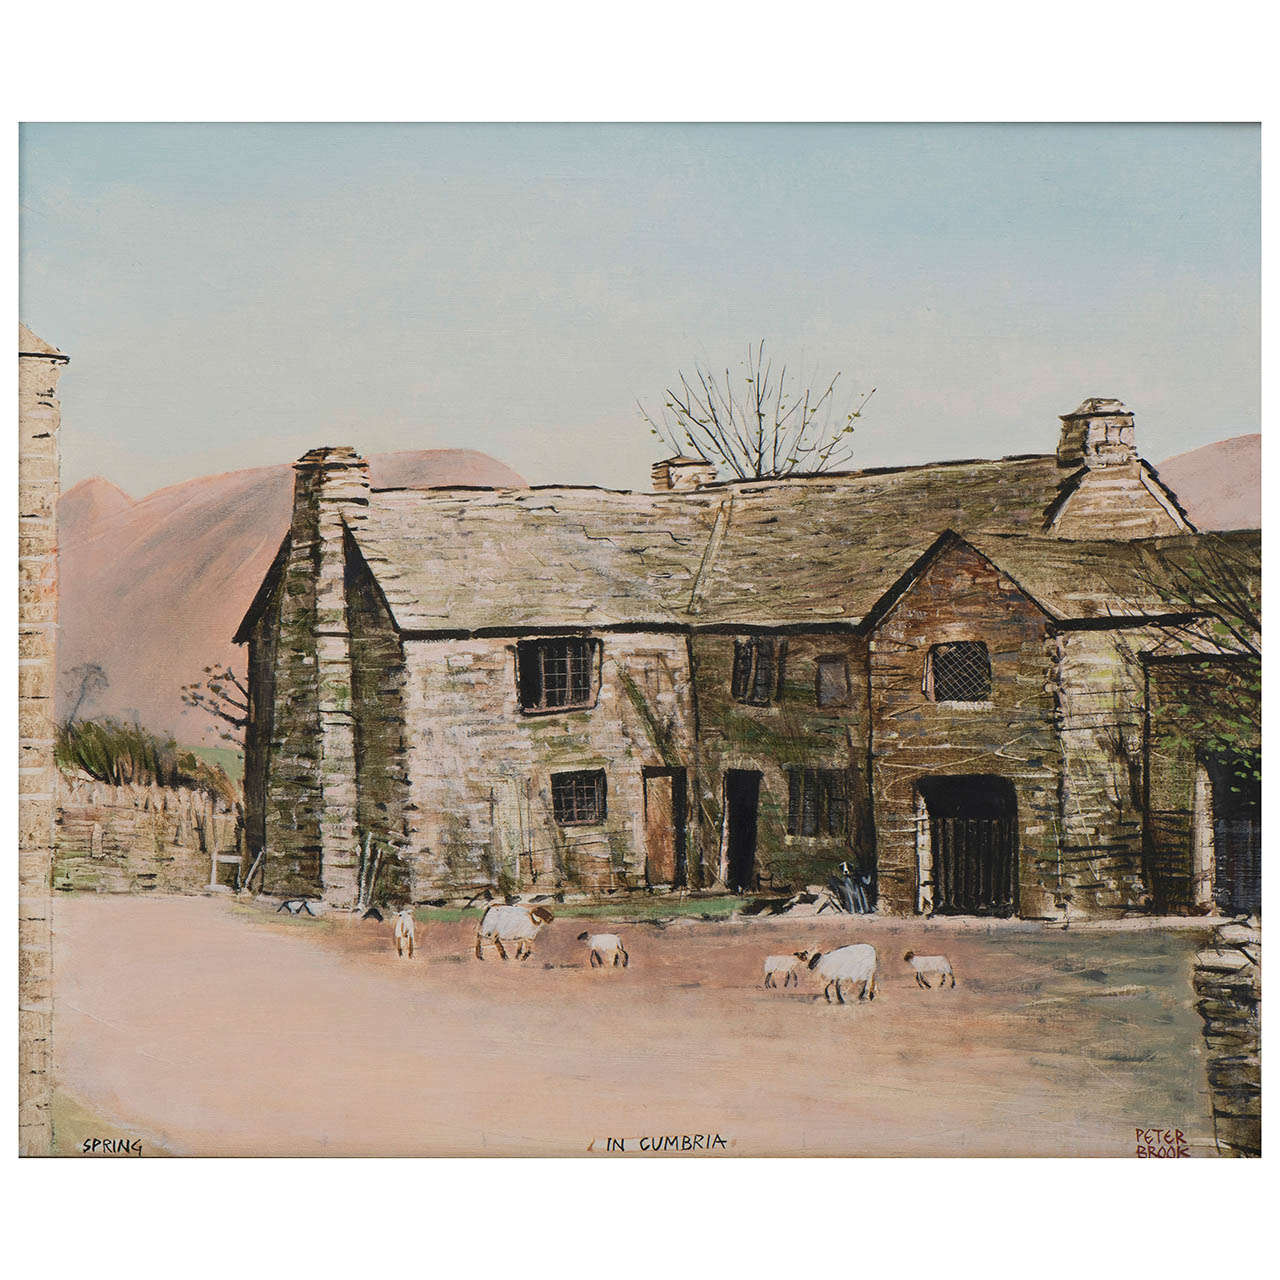 Peter Brook painting oil on canvas "Spring in Cumbria", England circa 1970 For Sale